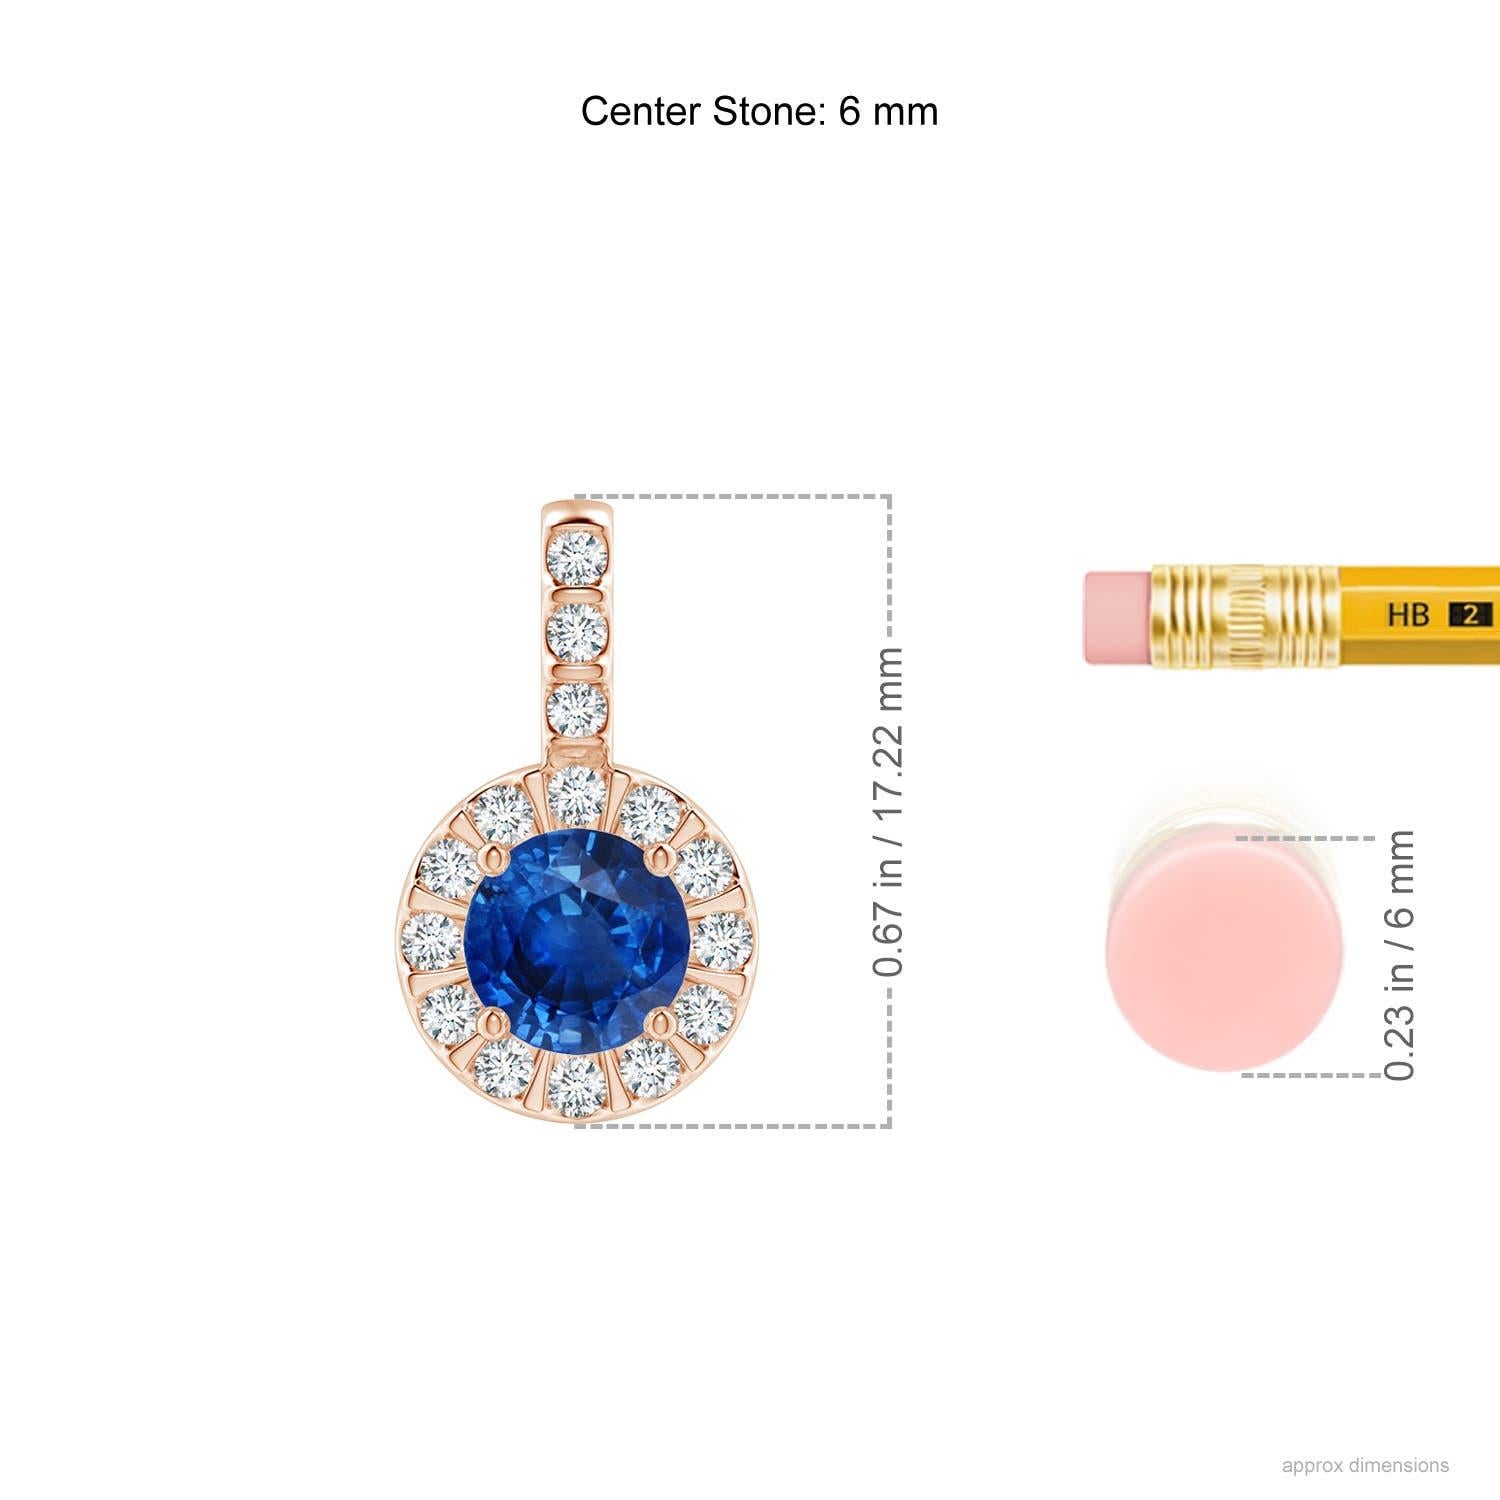 The prong set sapphire's dreamy blue color is enhanced by sparkling diamonds that surround it and adorn the bale. For a distinctive look, the diamonds are mounted in a bar setting. This elegant and stylish sapphire halo pendant is sculpted in 14k